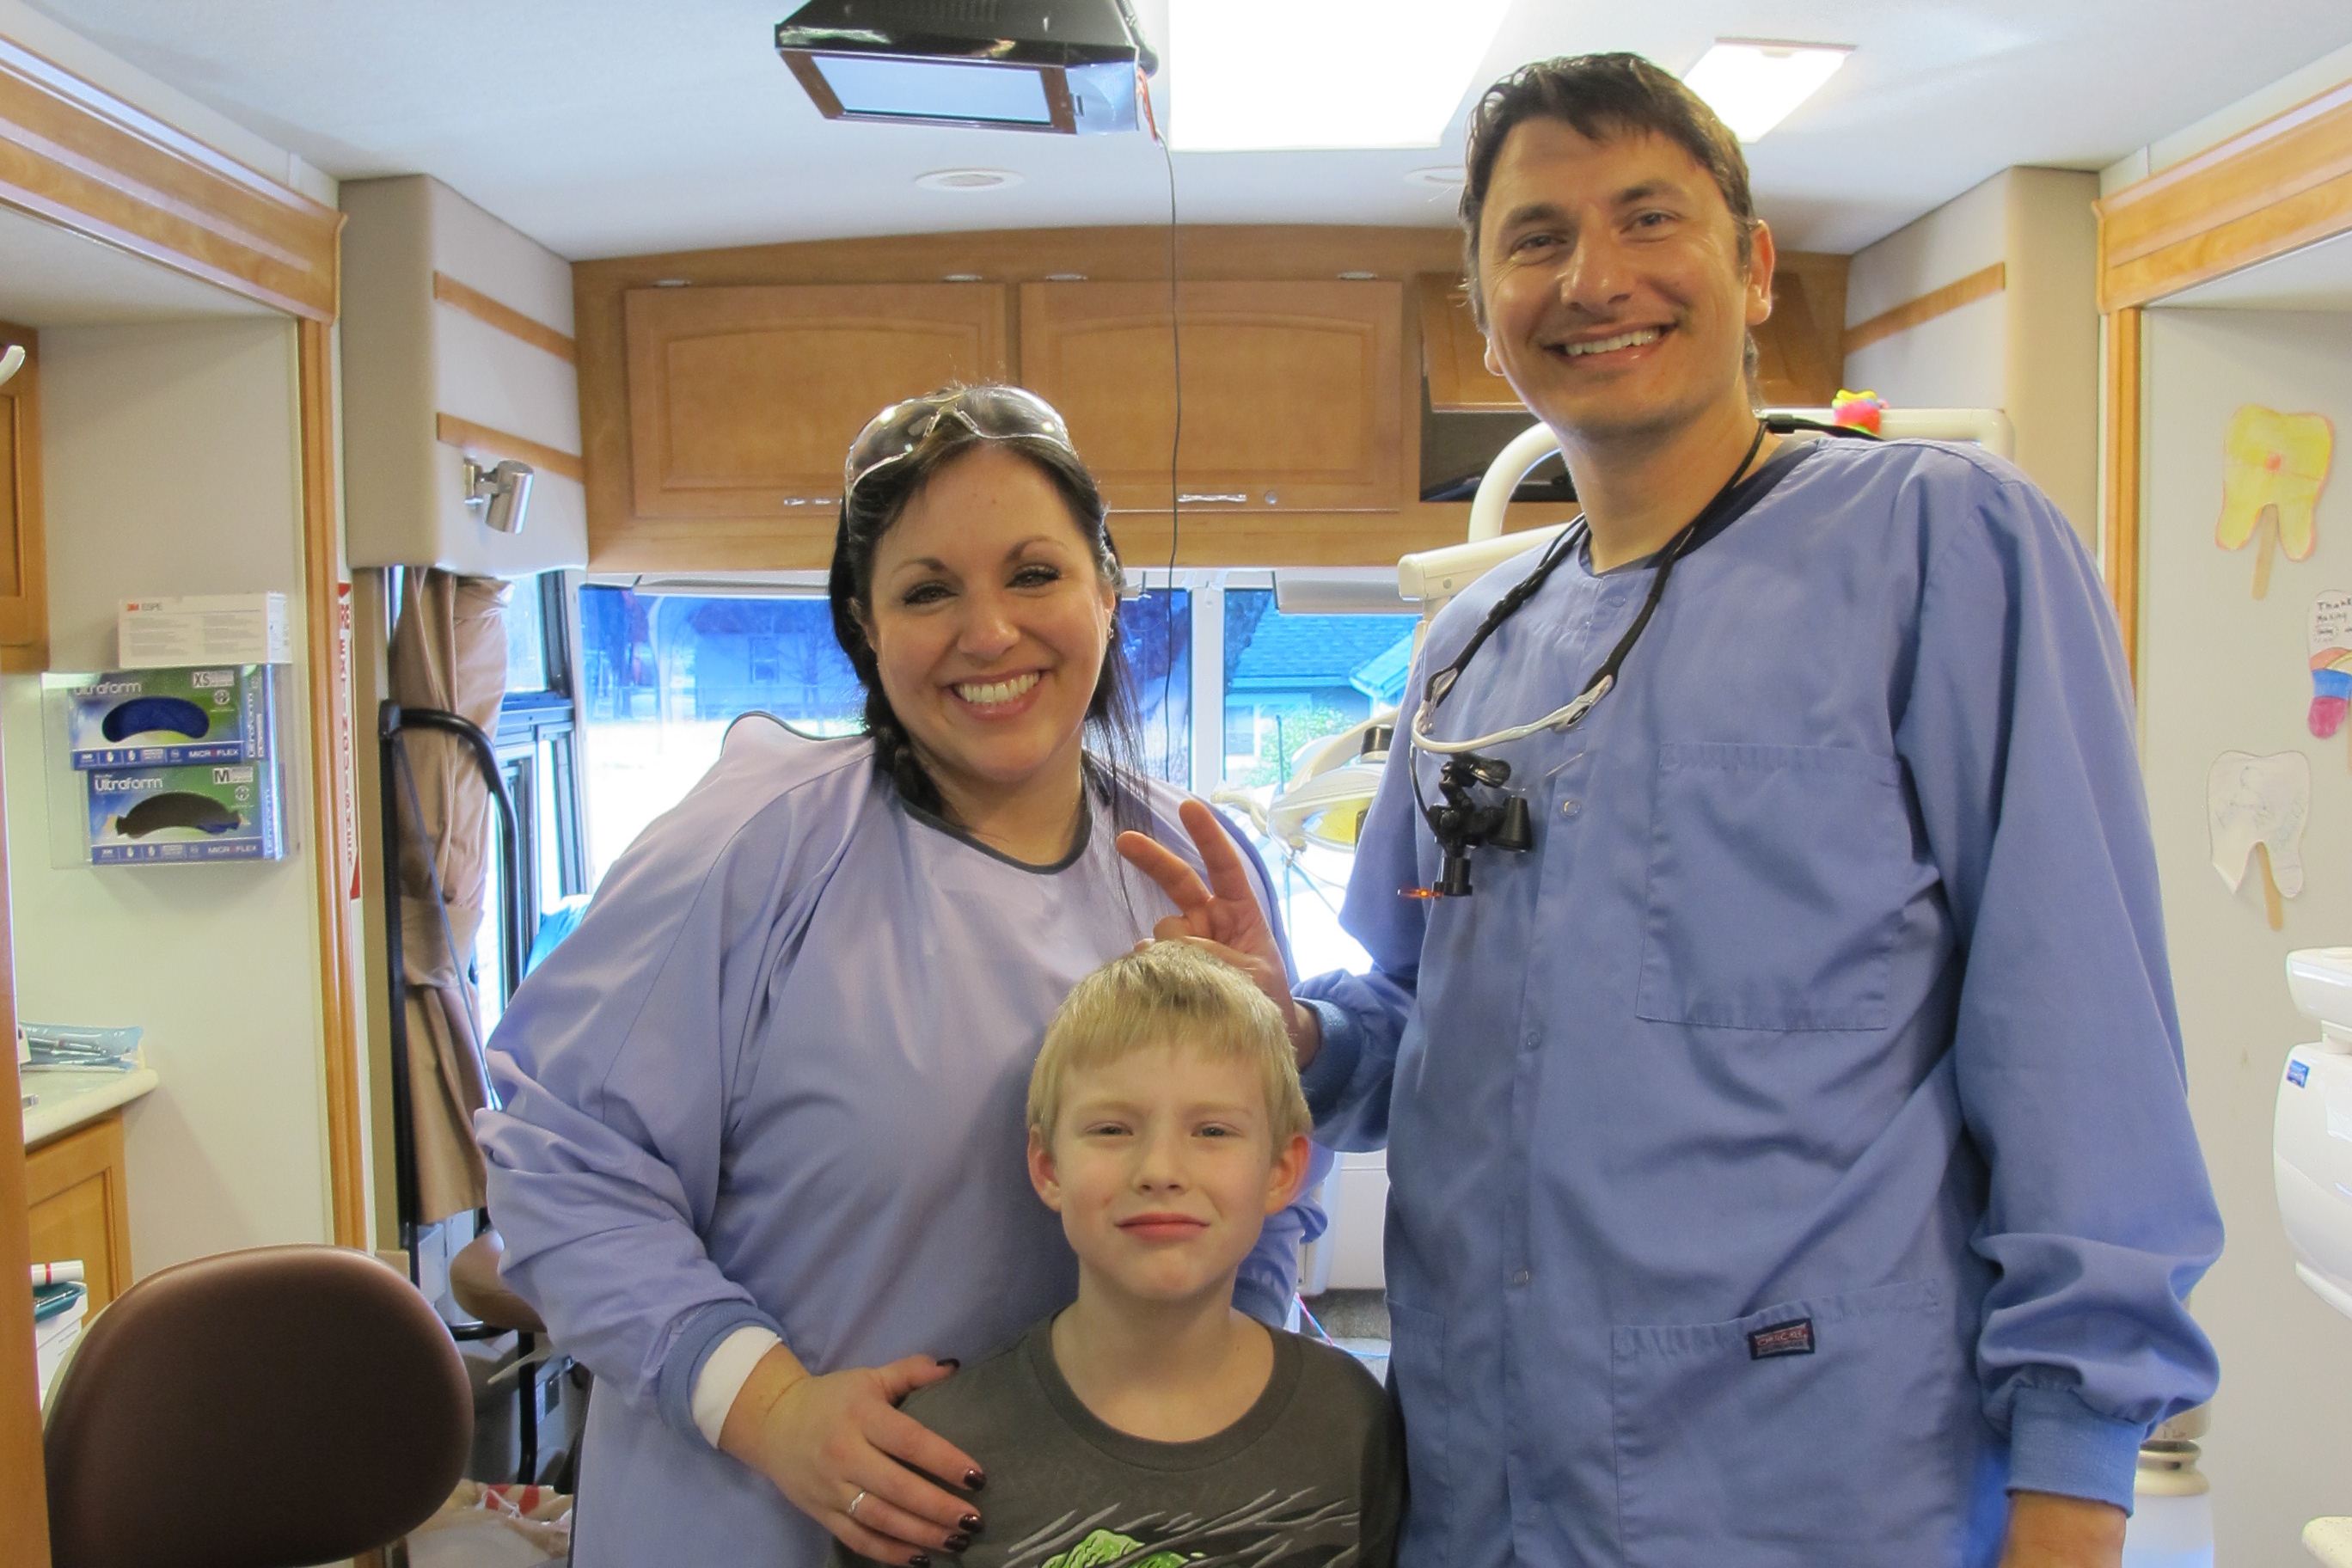 Dental team member smiling with young patient